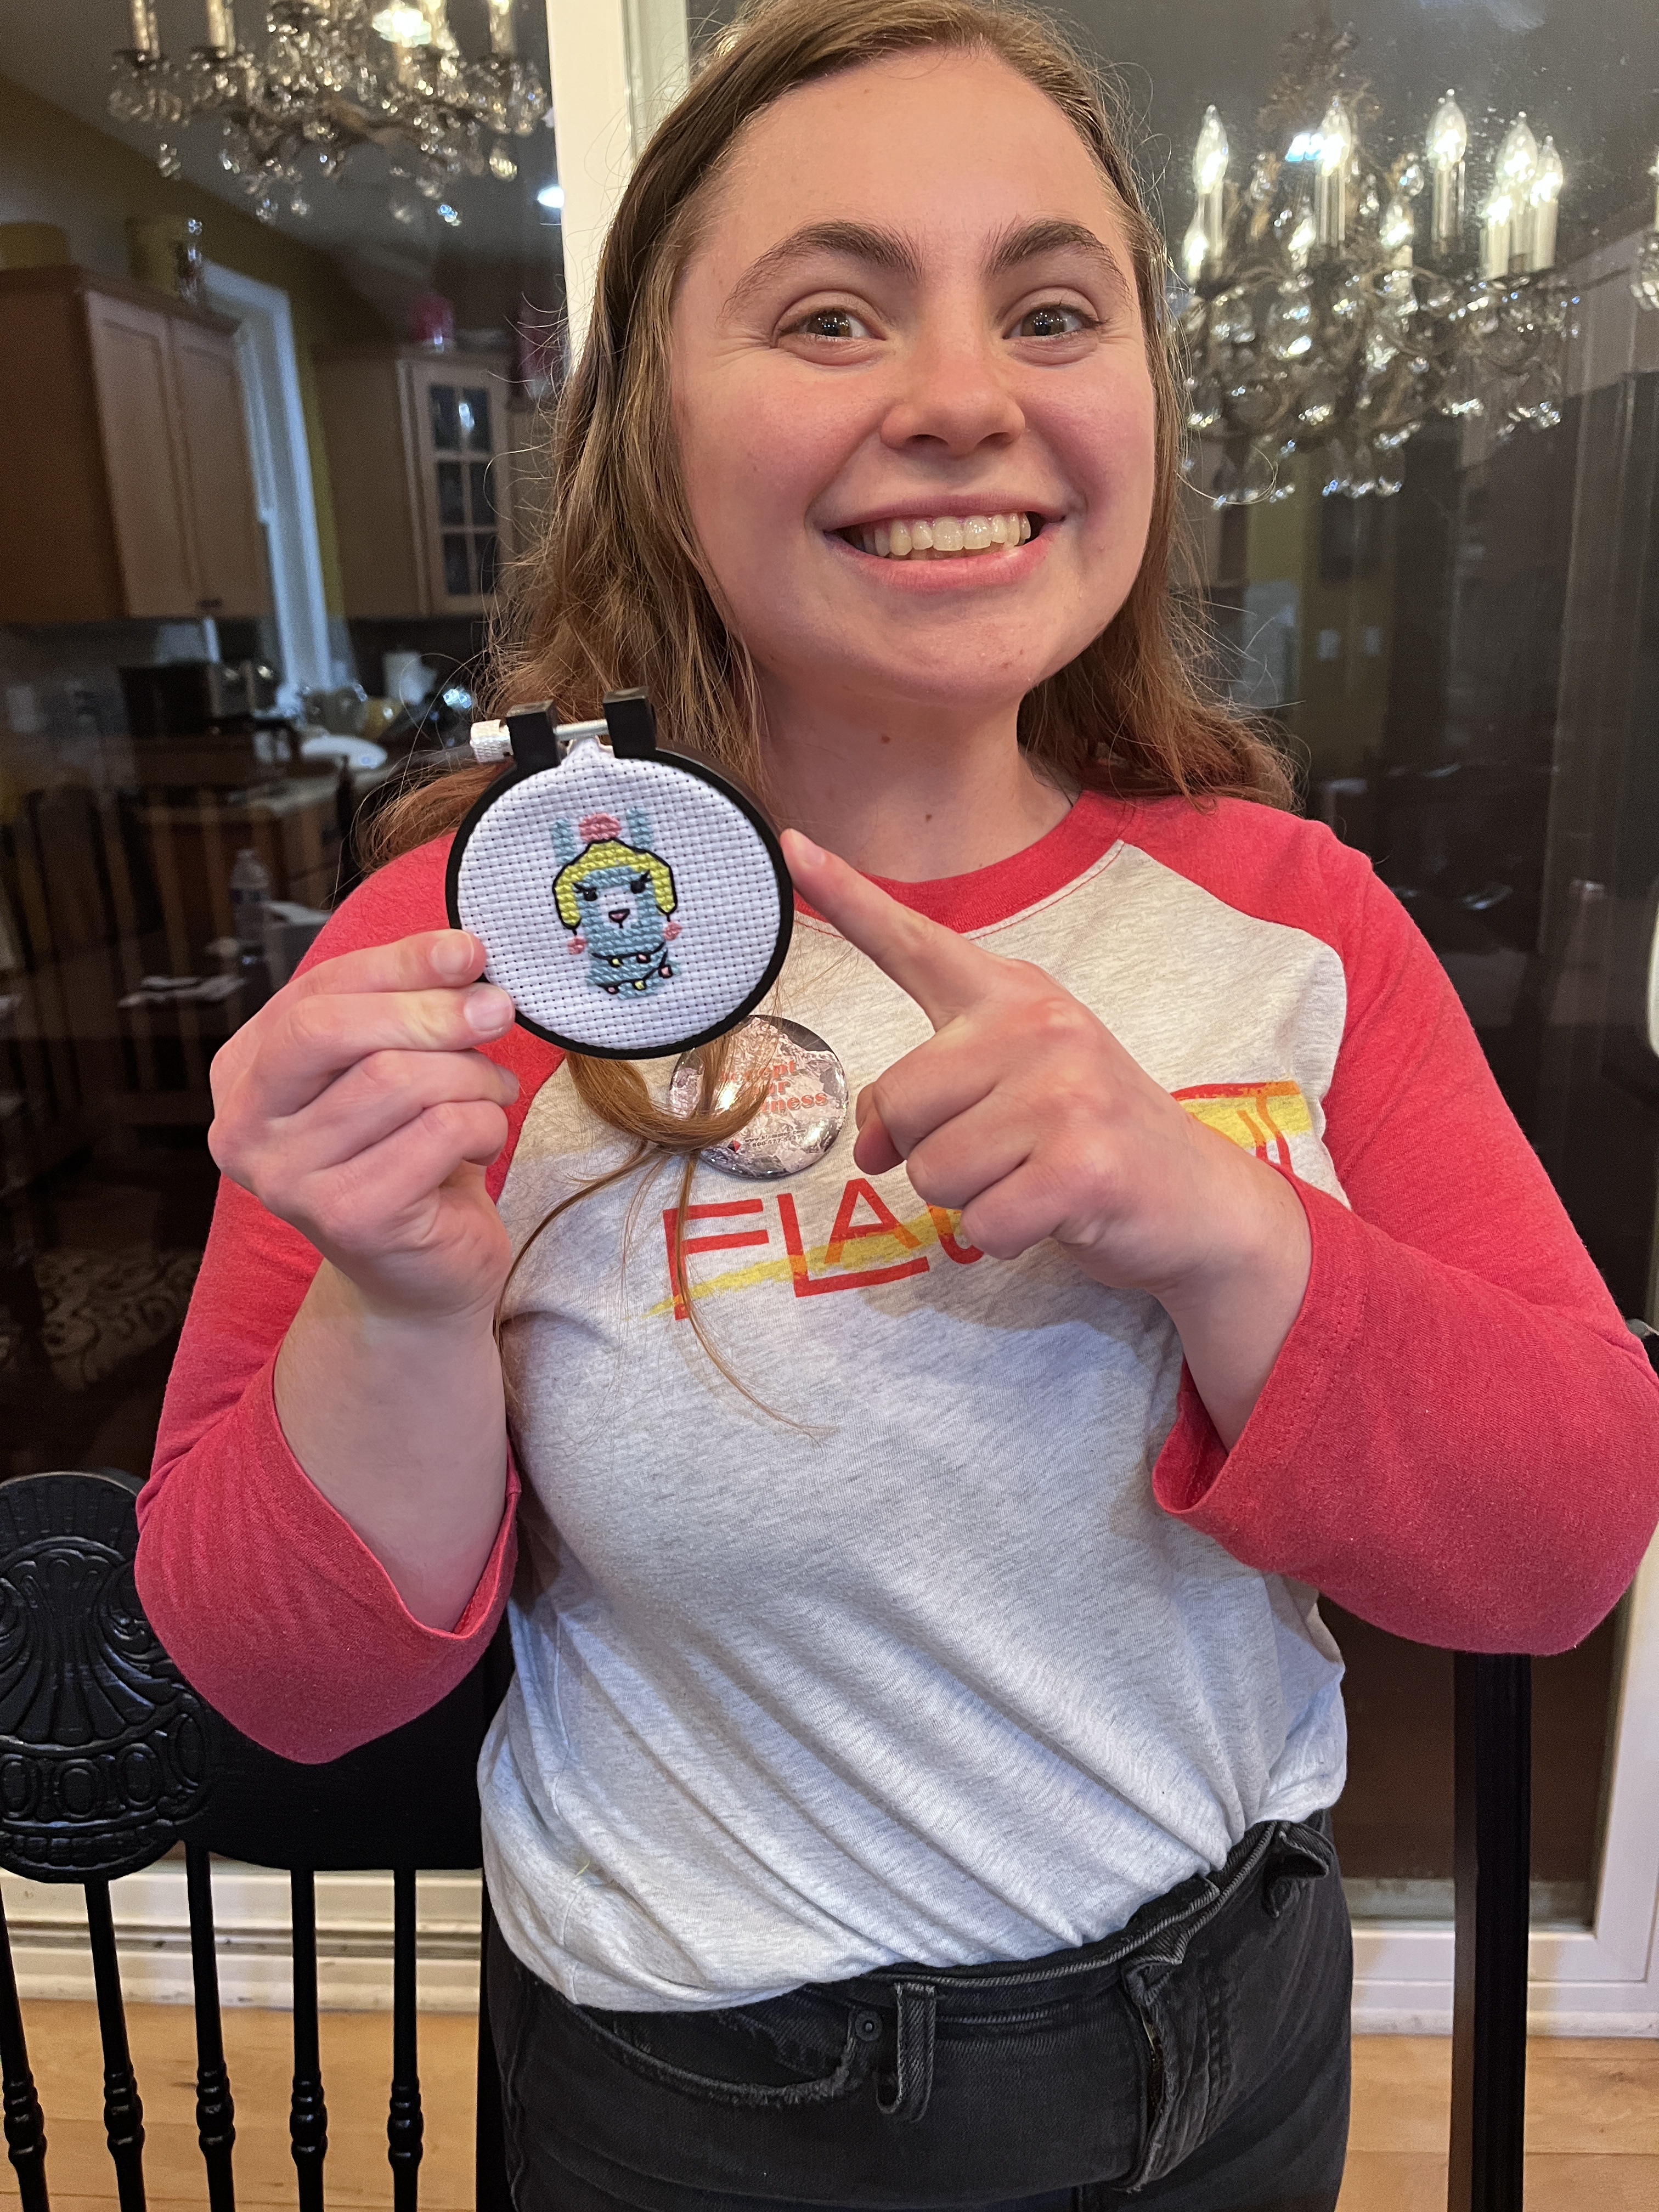 Kaylee taking pride in her cross-stitched llama